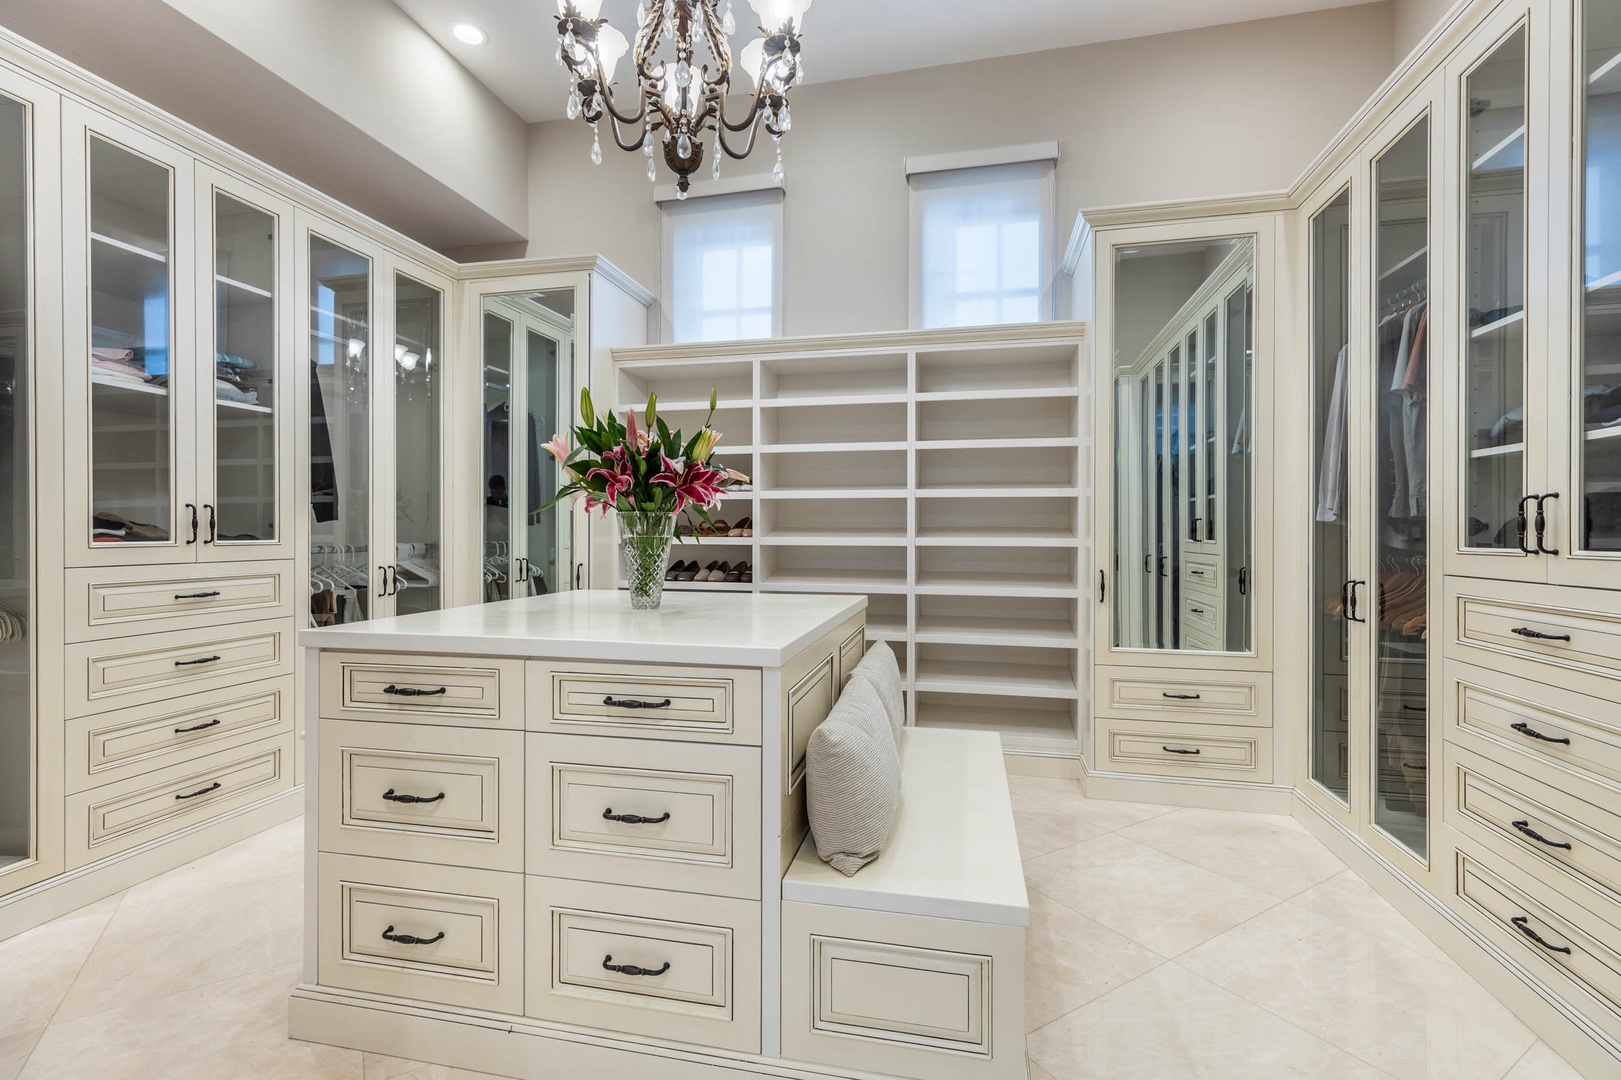 Honolulu Vacation Rentals, The Kahala Mansion - Custom walk-in closet in white cabinetry provides storage and pampered space.